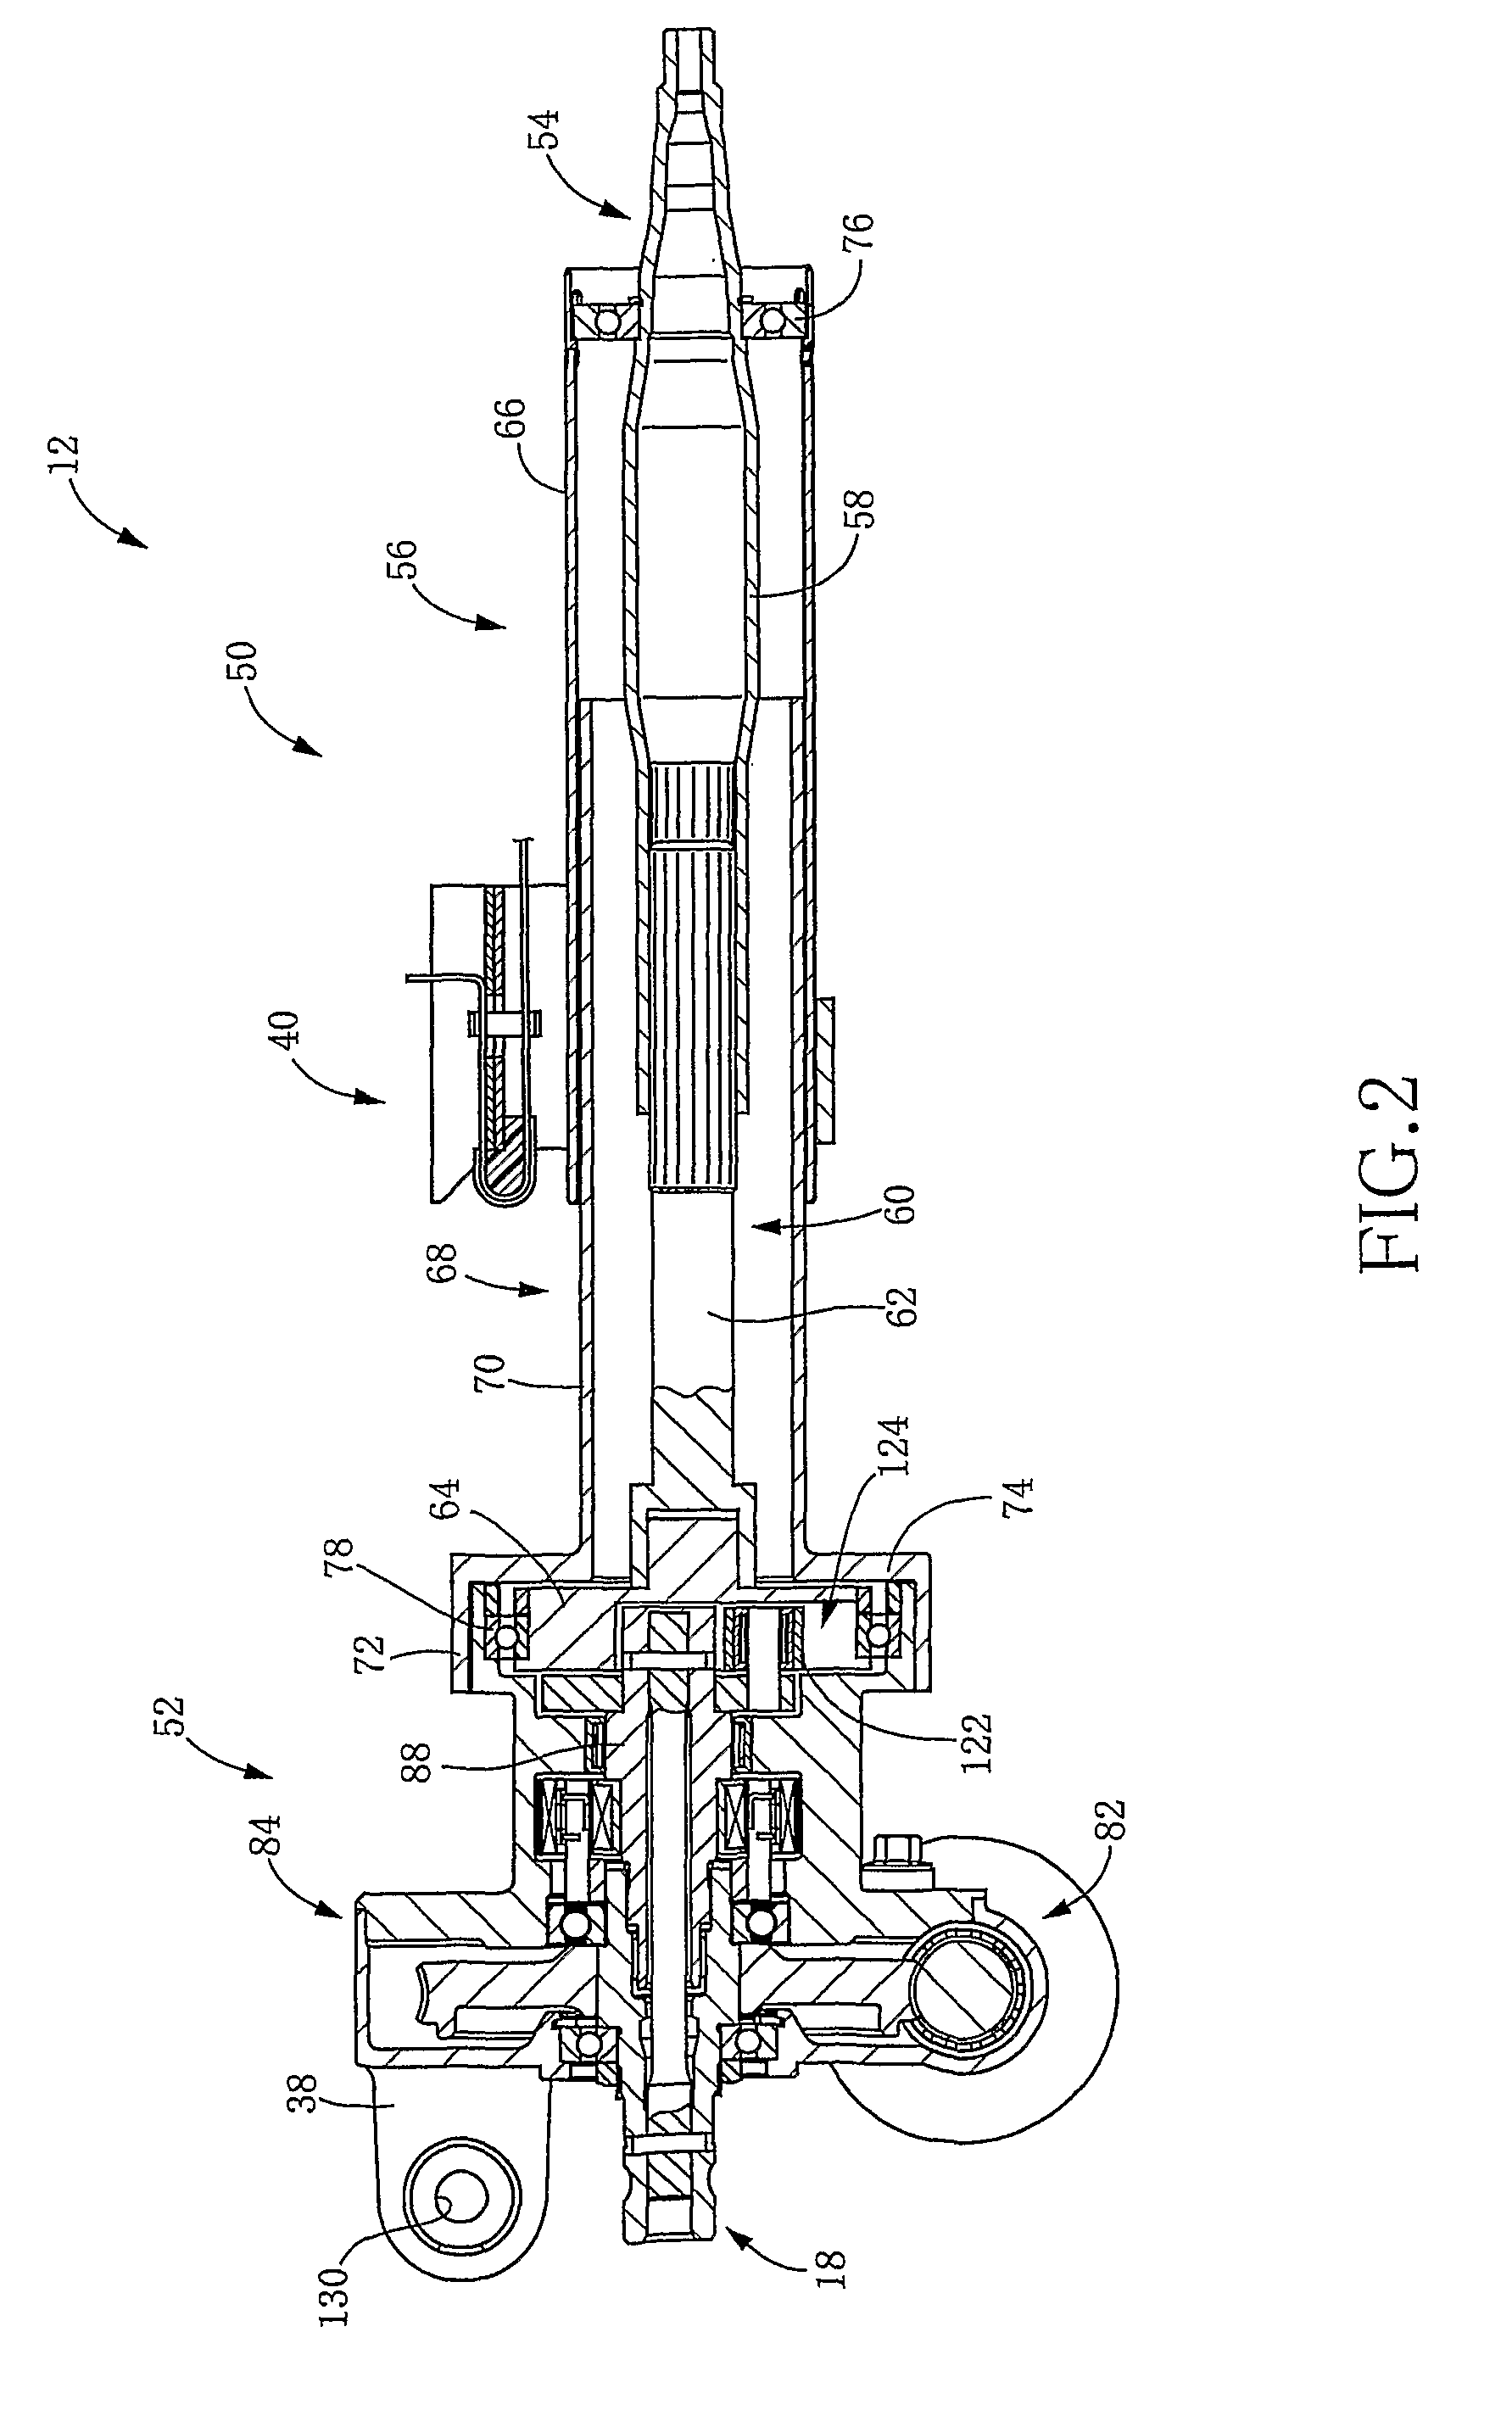 Steering-force transmitting apparatus for vehicle